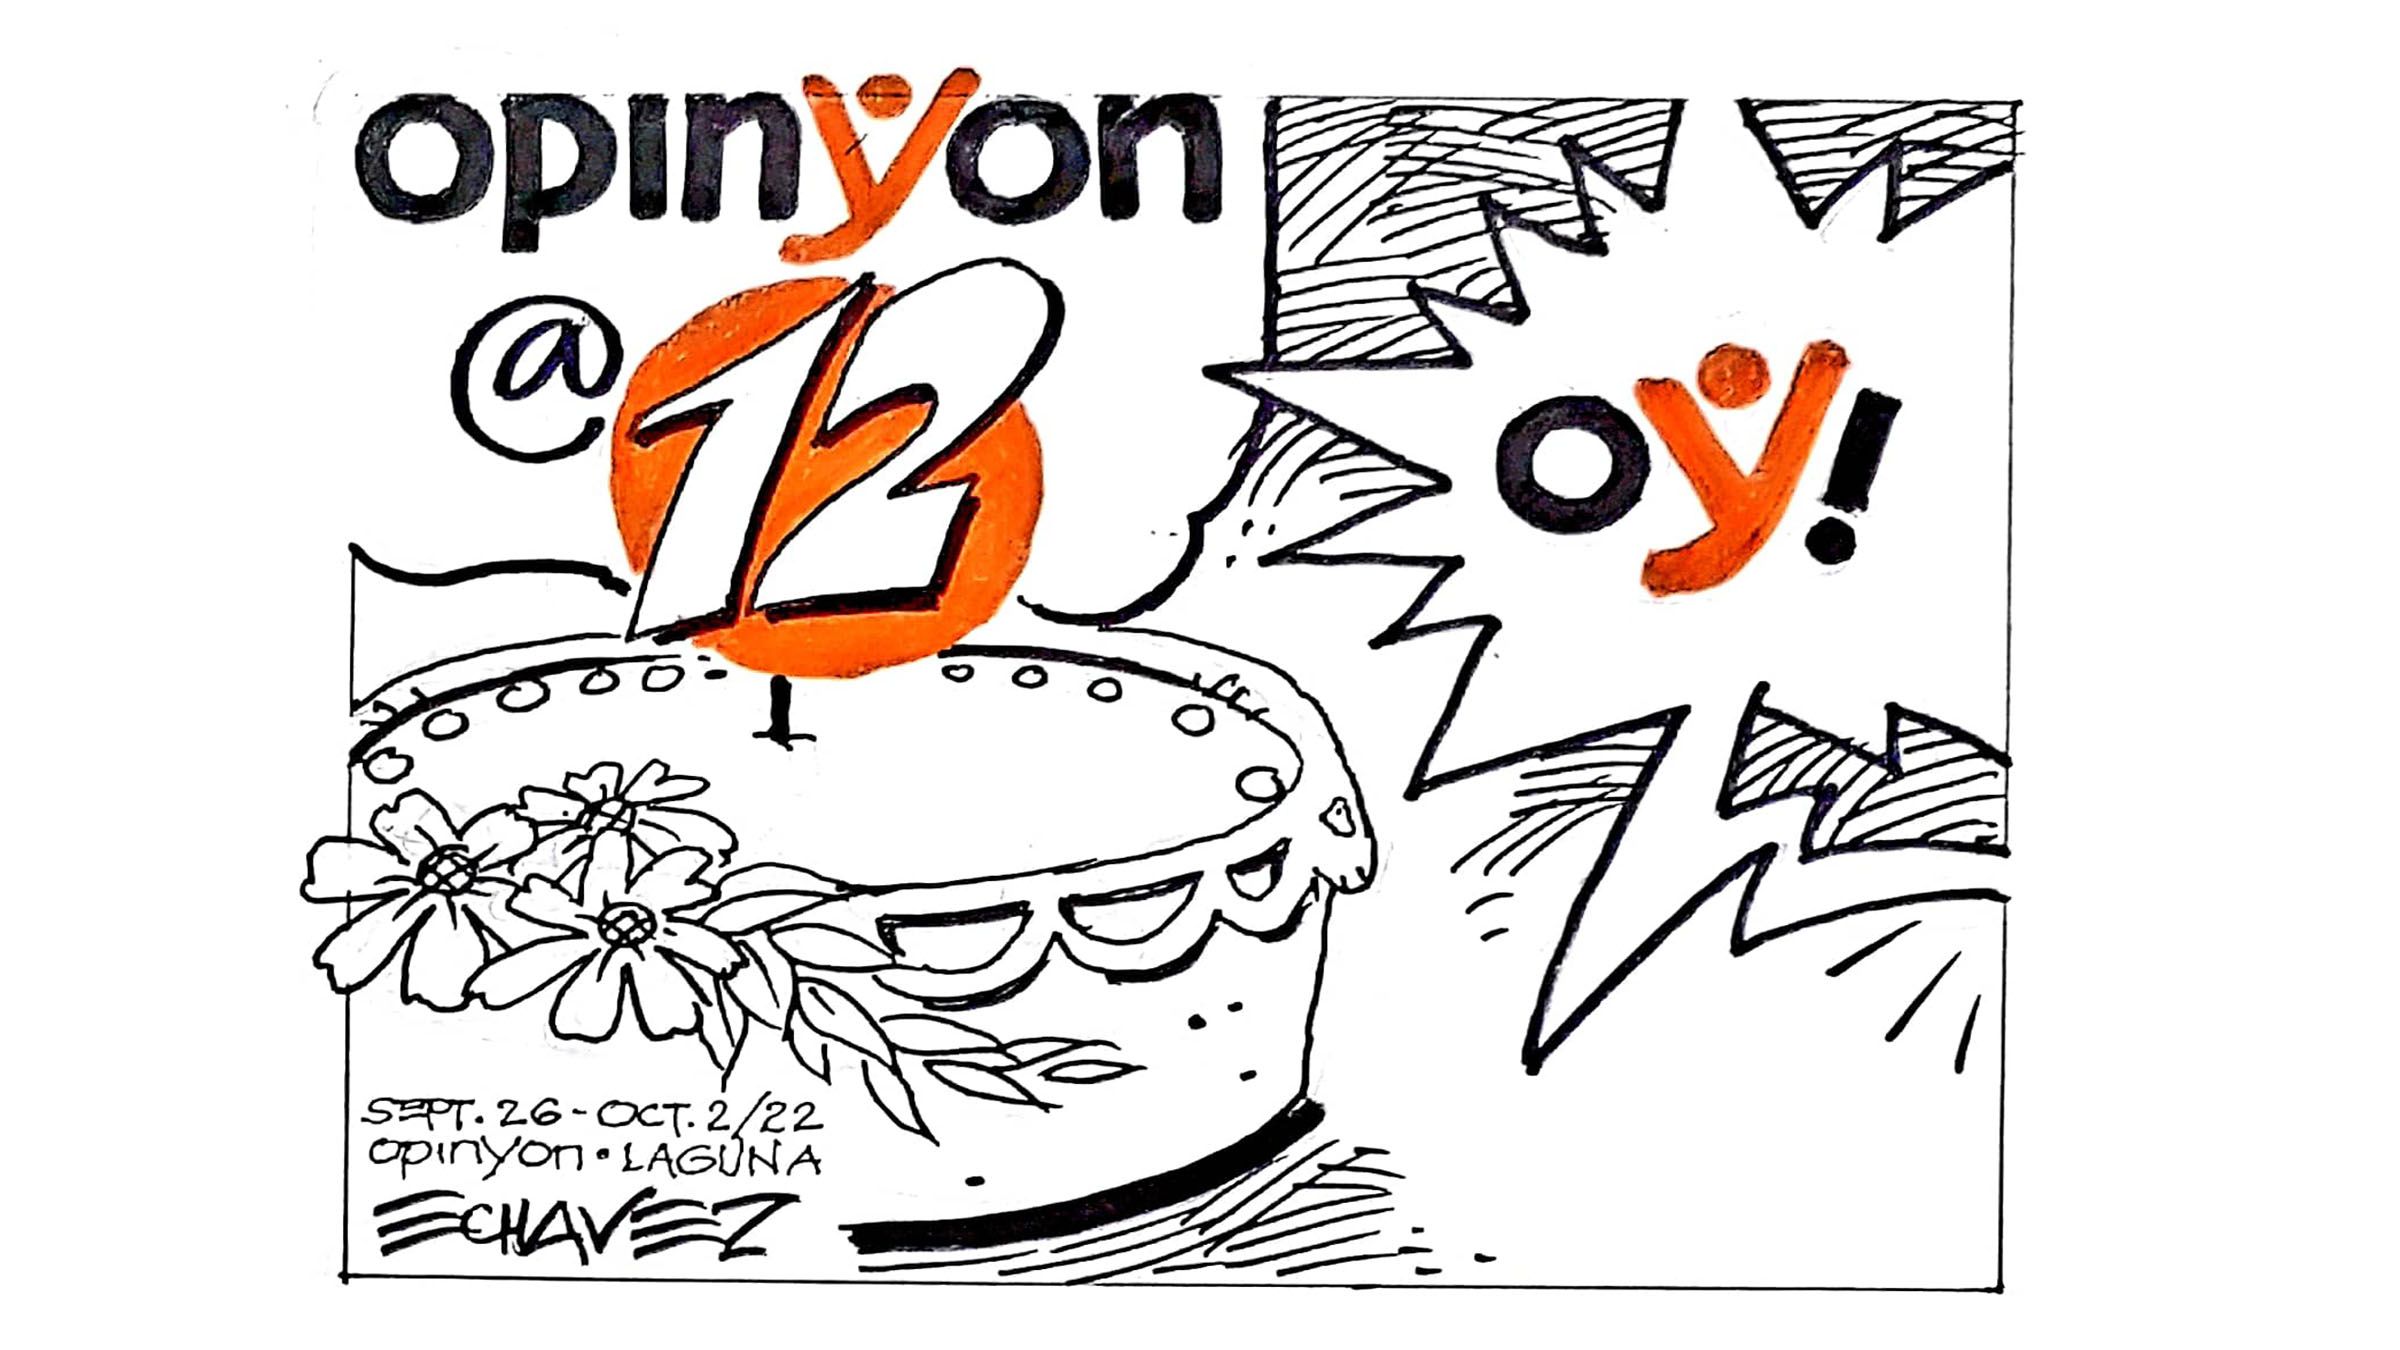 OpinYon is now on its 12th year!